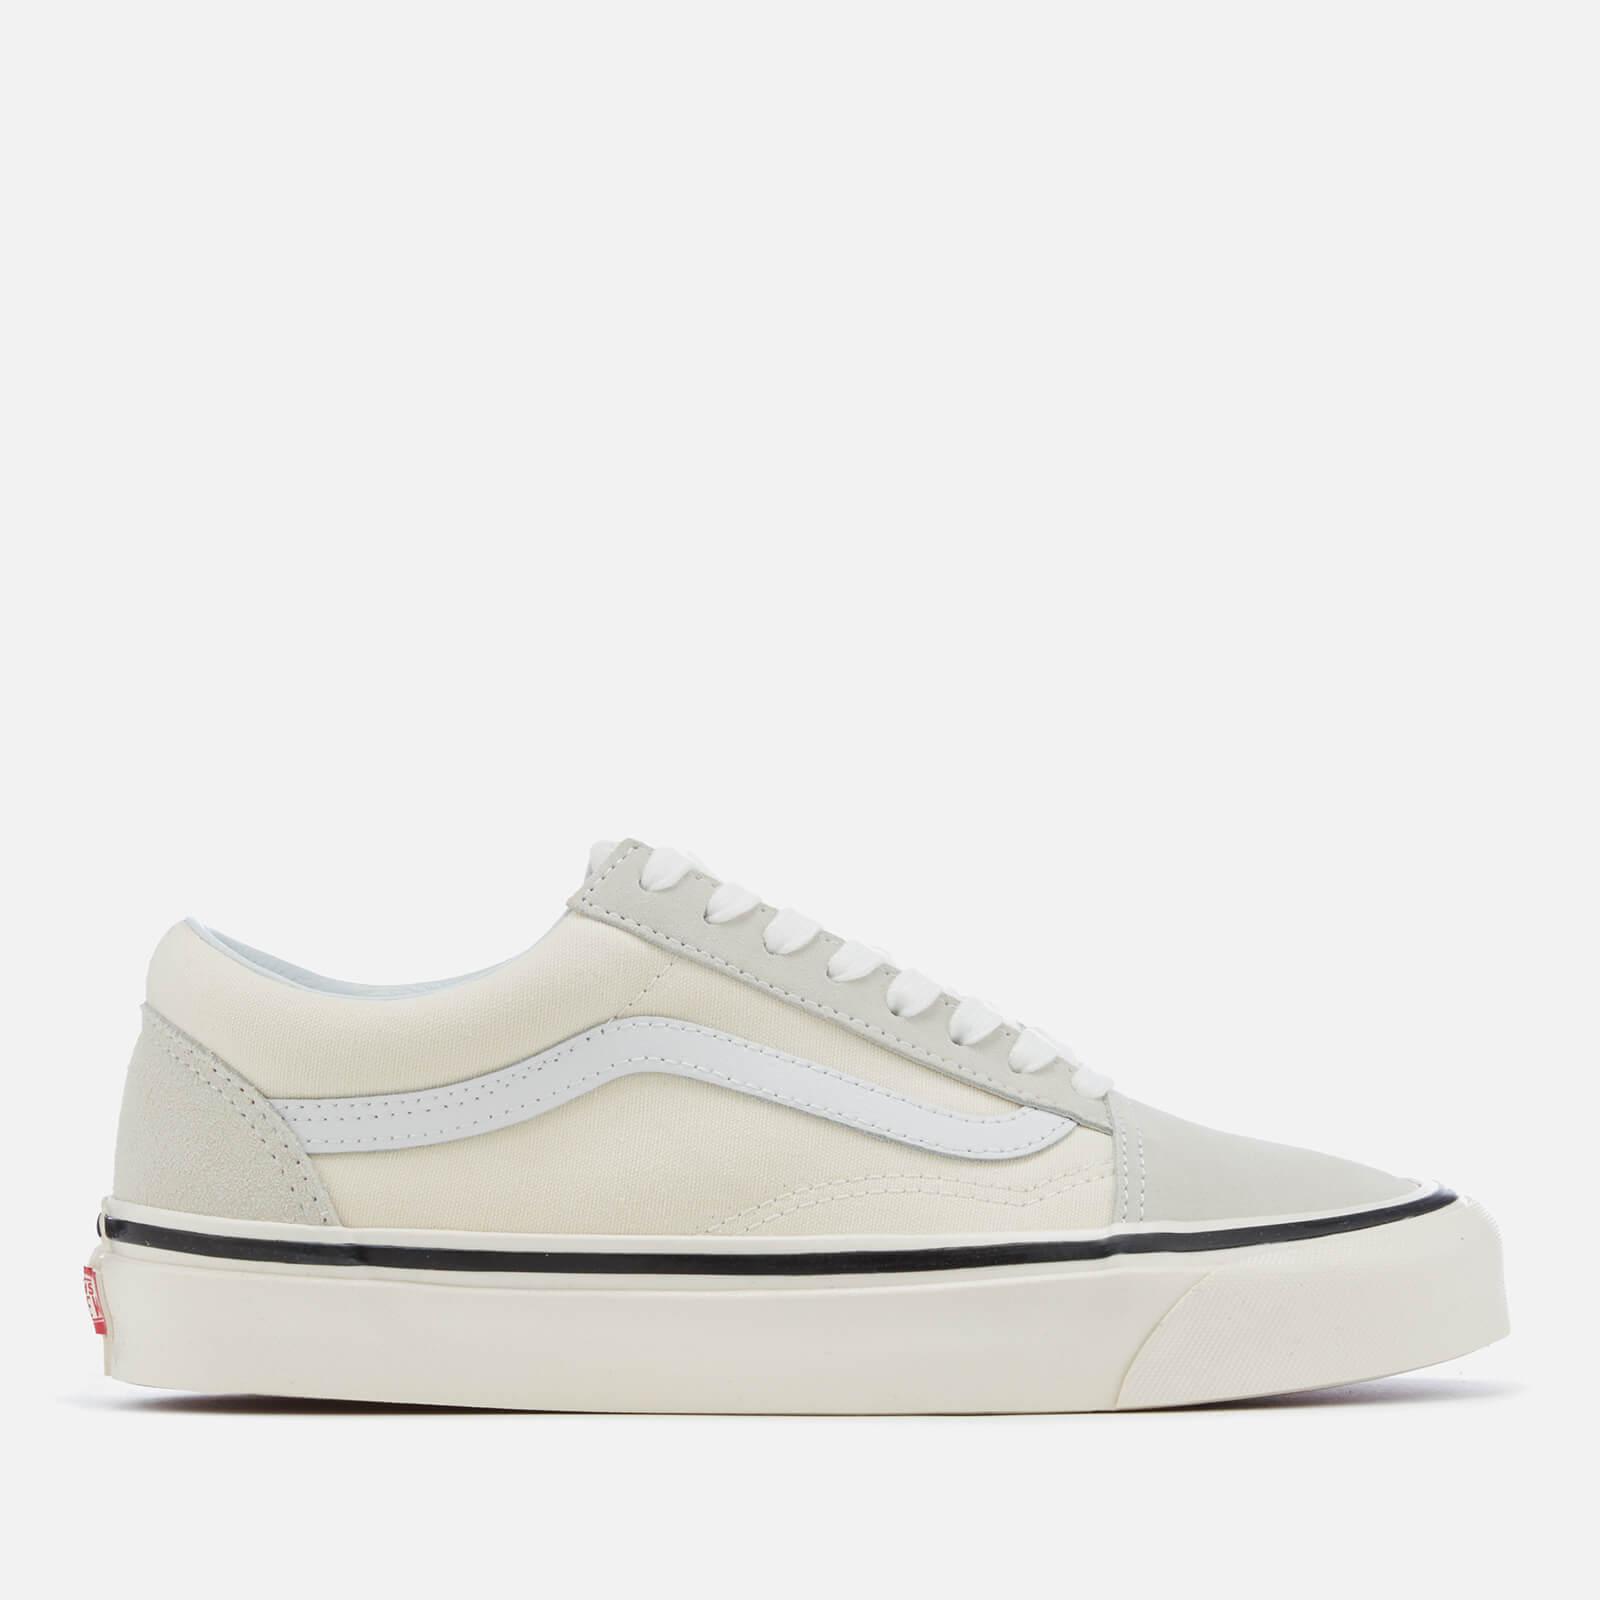 Vans Rubber Anaheim Old Skool 36 Dx Trainers in White - Save 24% | Lyst